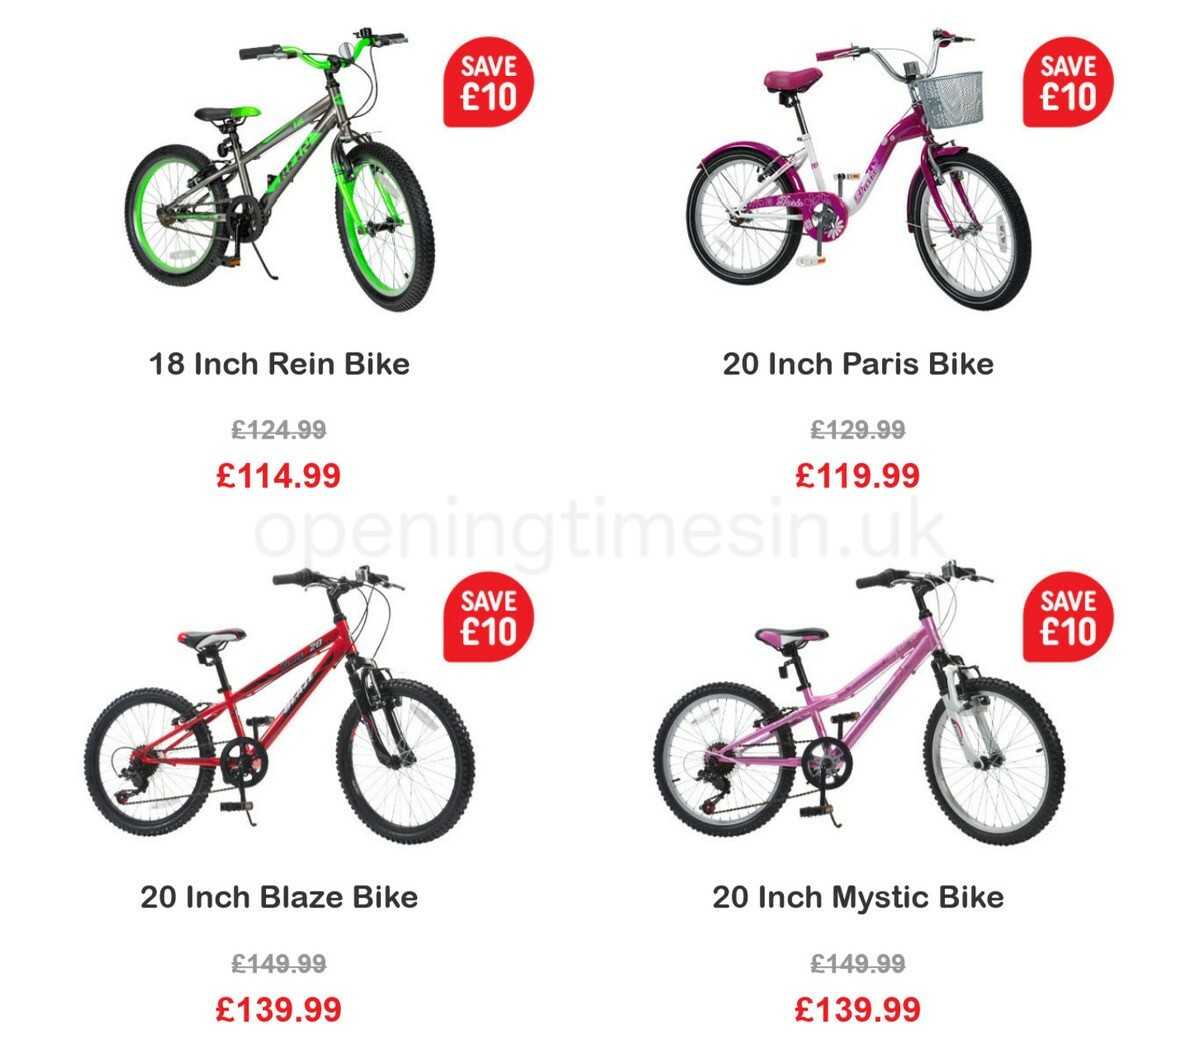 Smyths Toys Summer Savings on selected bikes Offers from 11 June